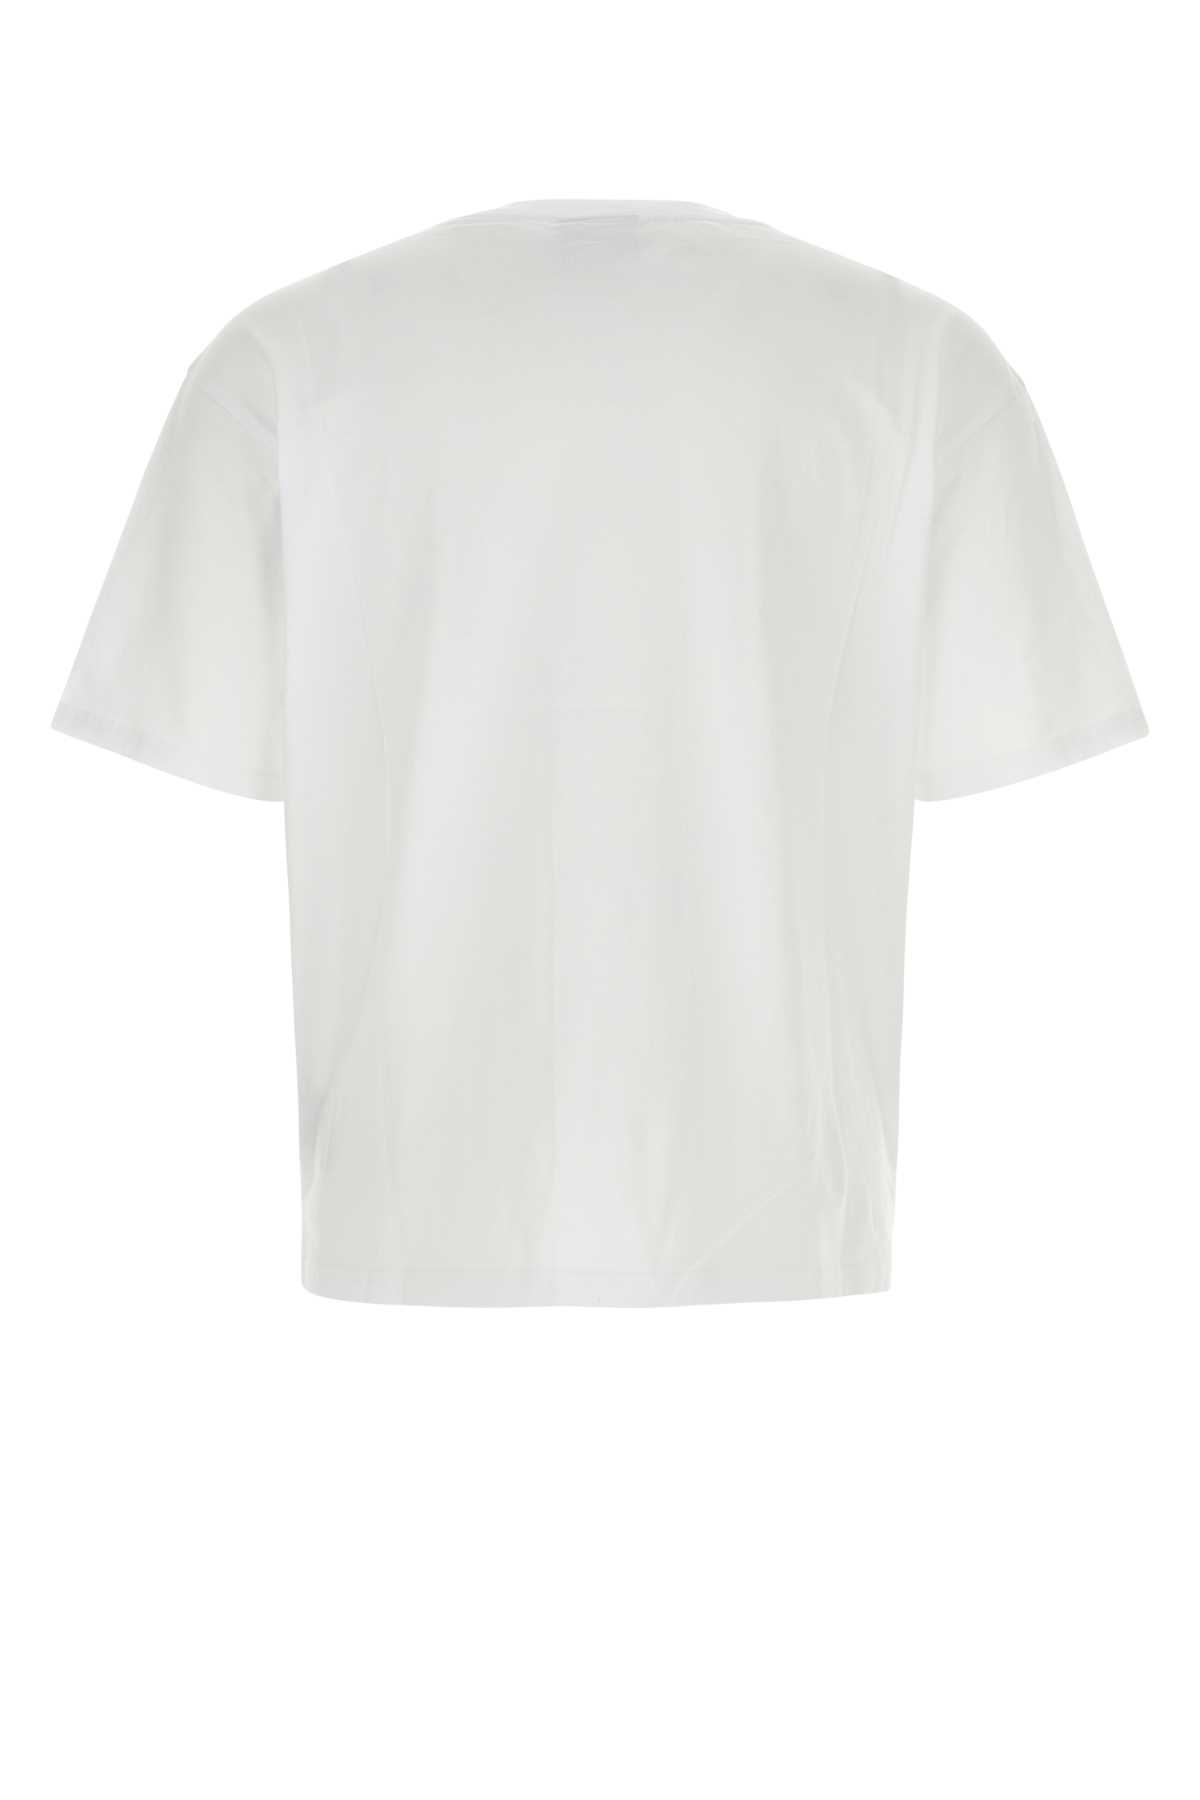 Bluemarble White Cotton T-shirt In Wht